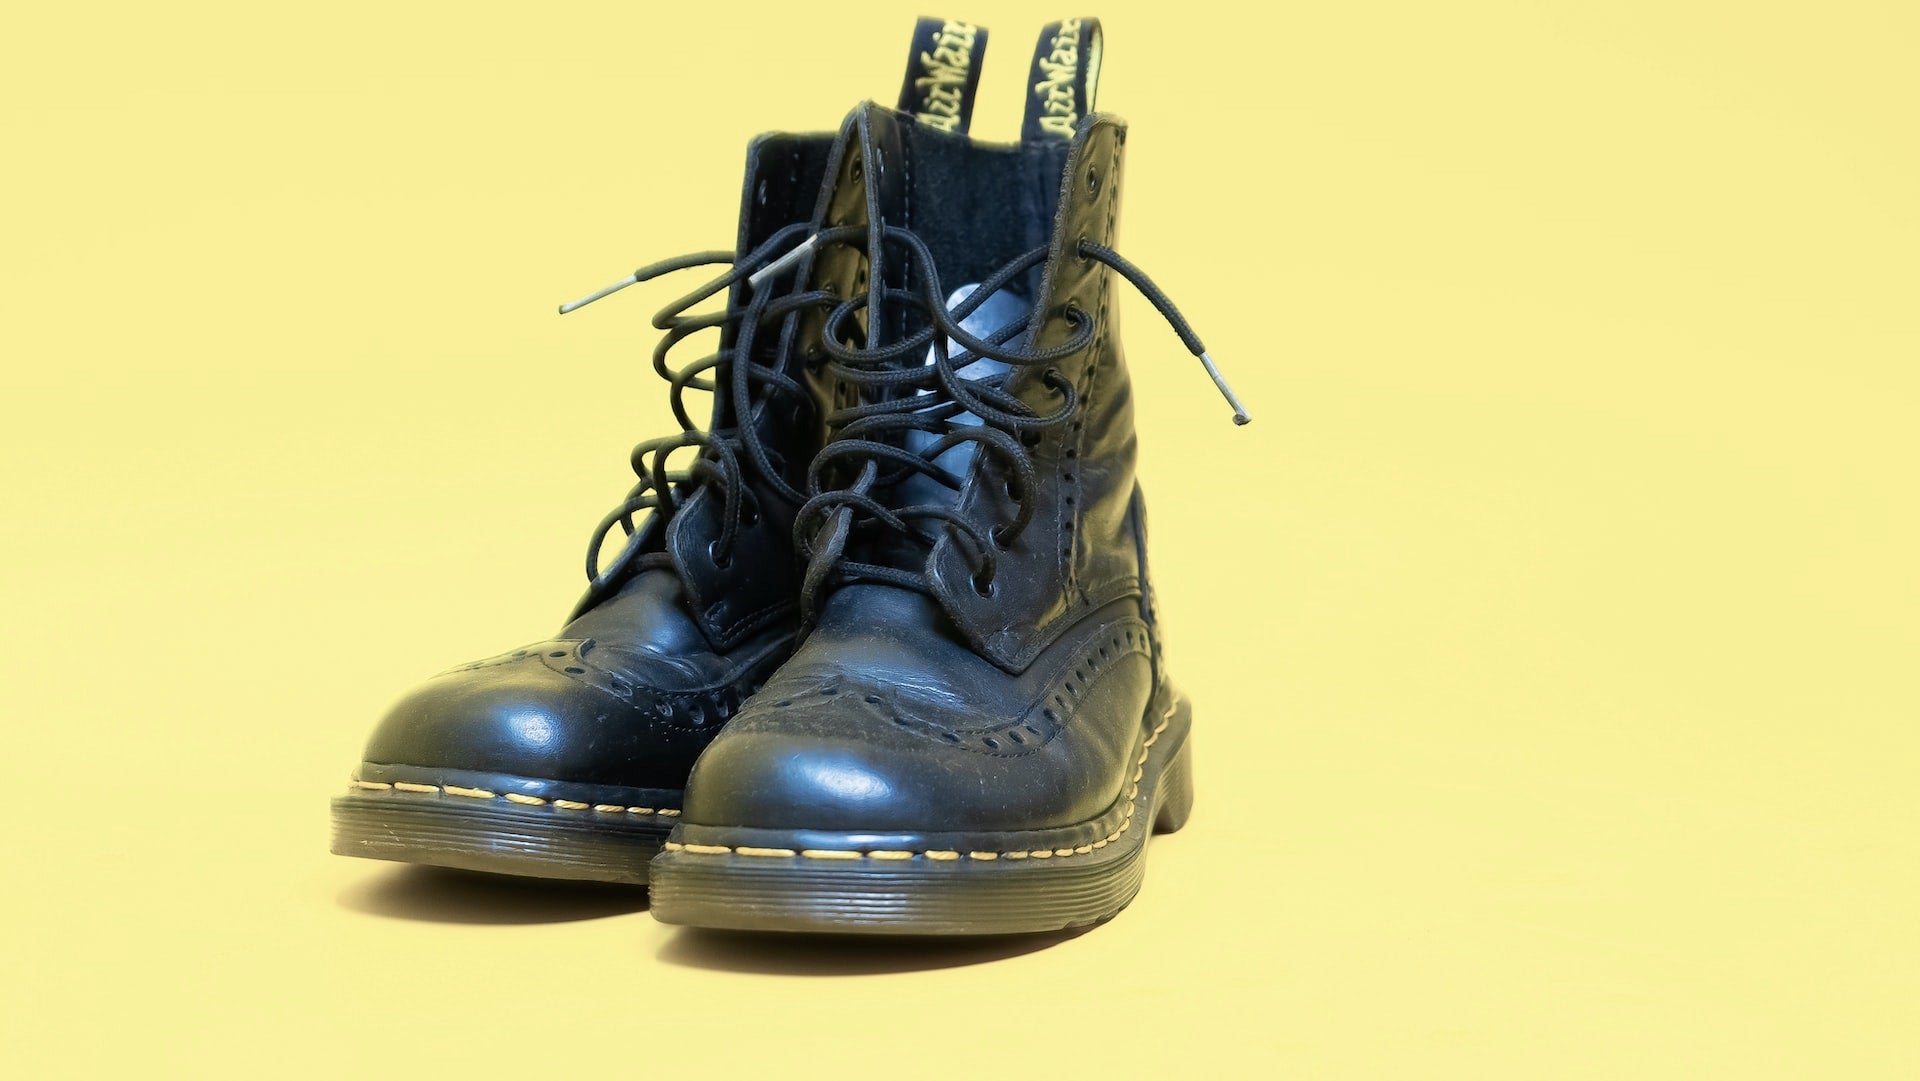 Styling Docs: 6 Types of Socks to Wear with Doc Martens